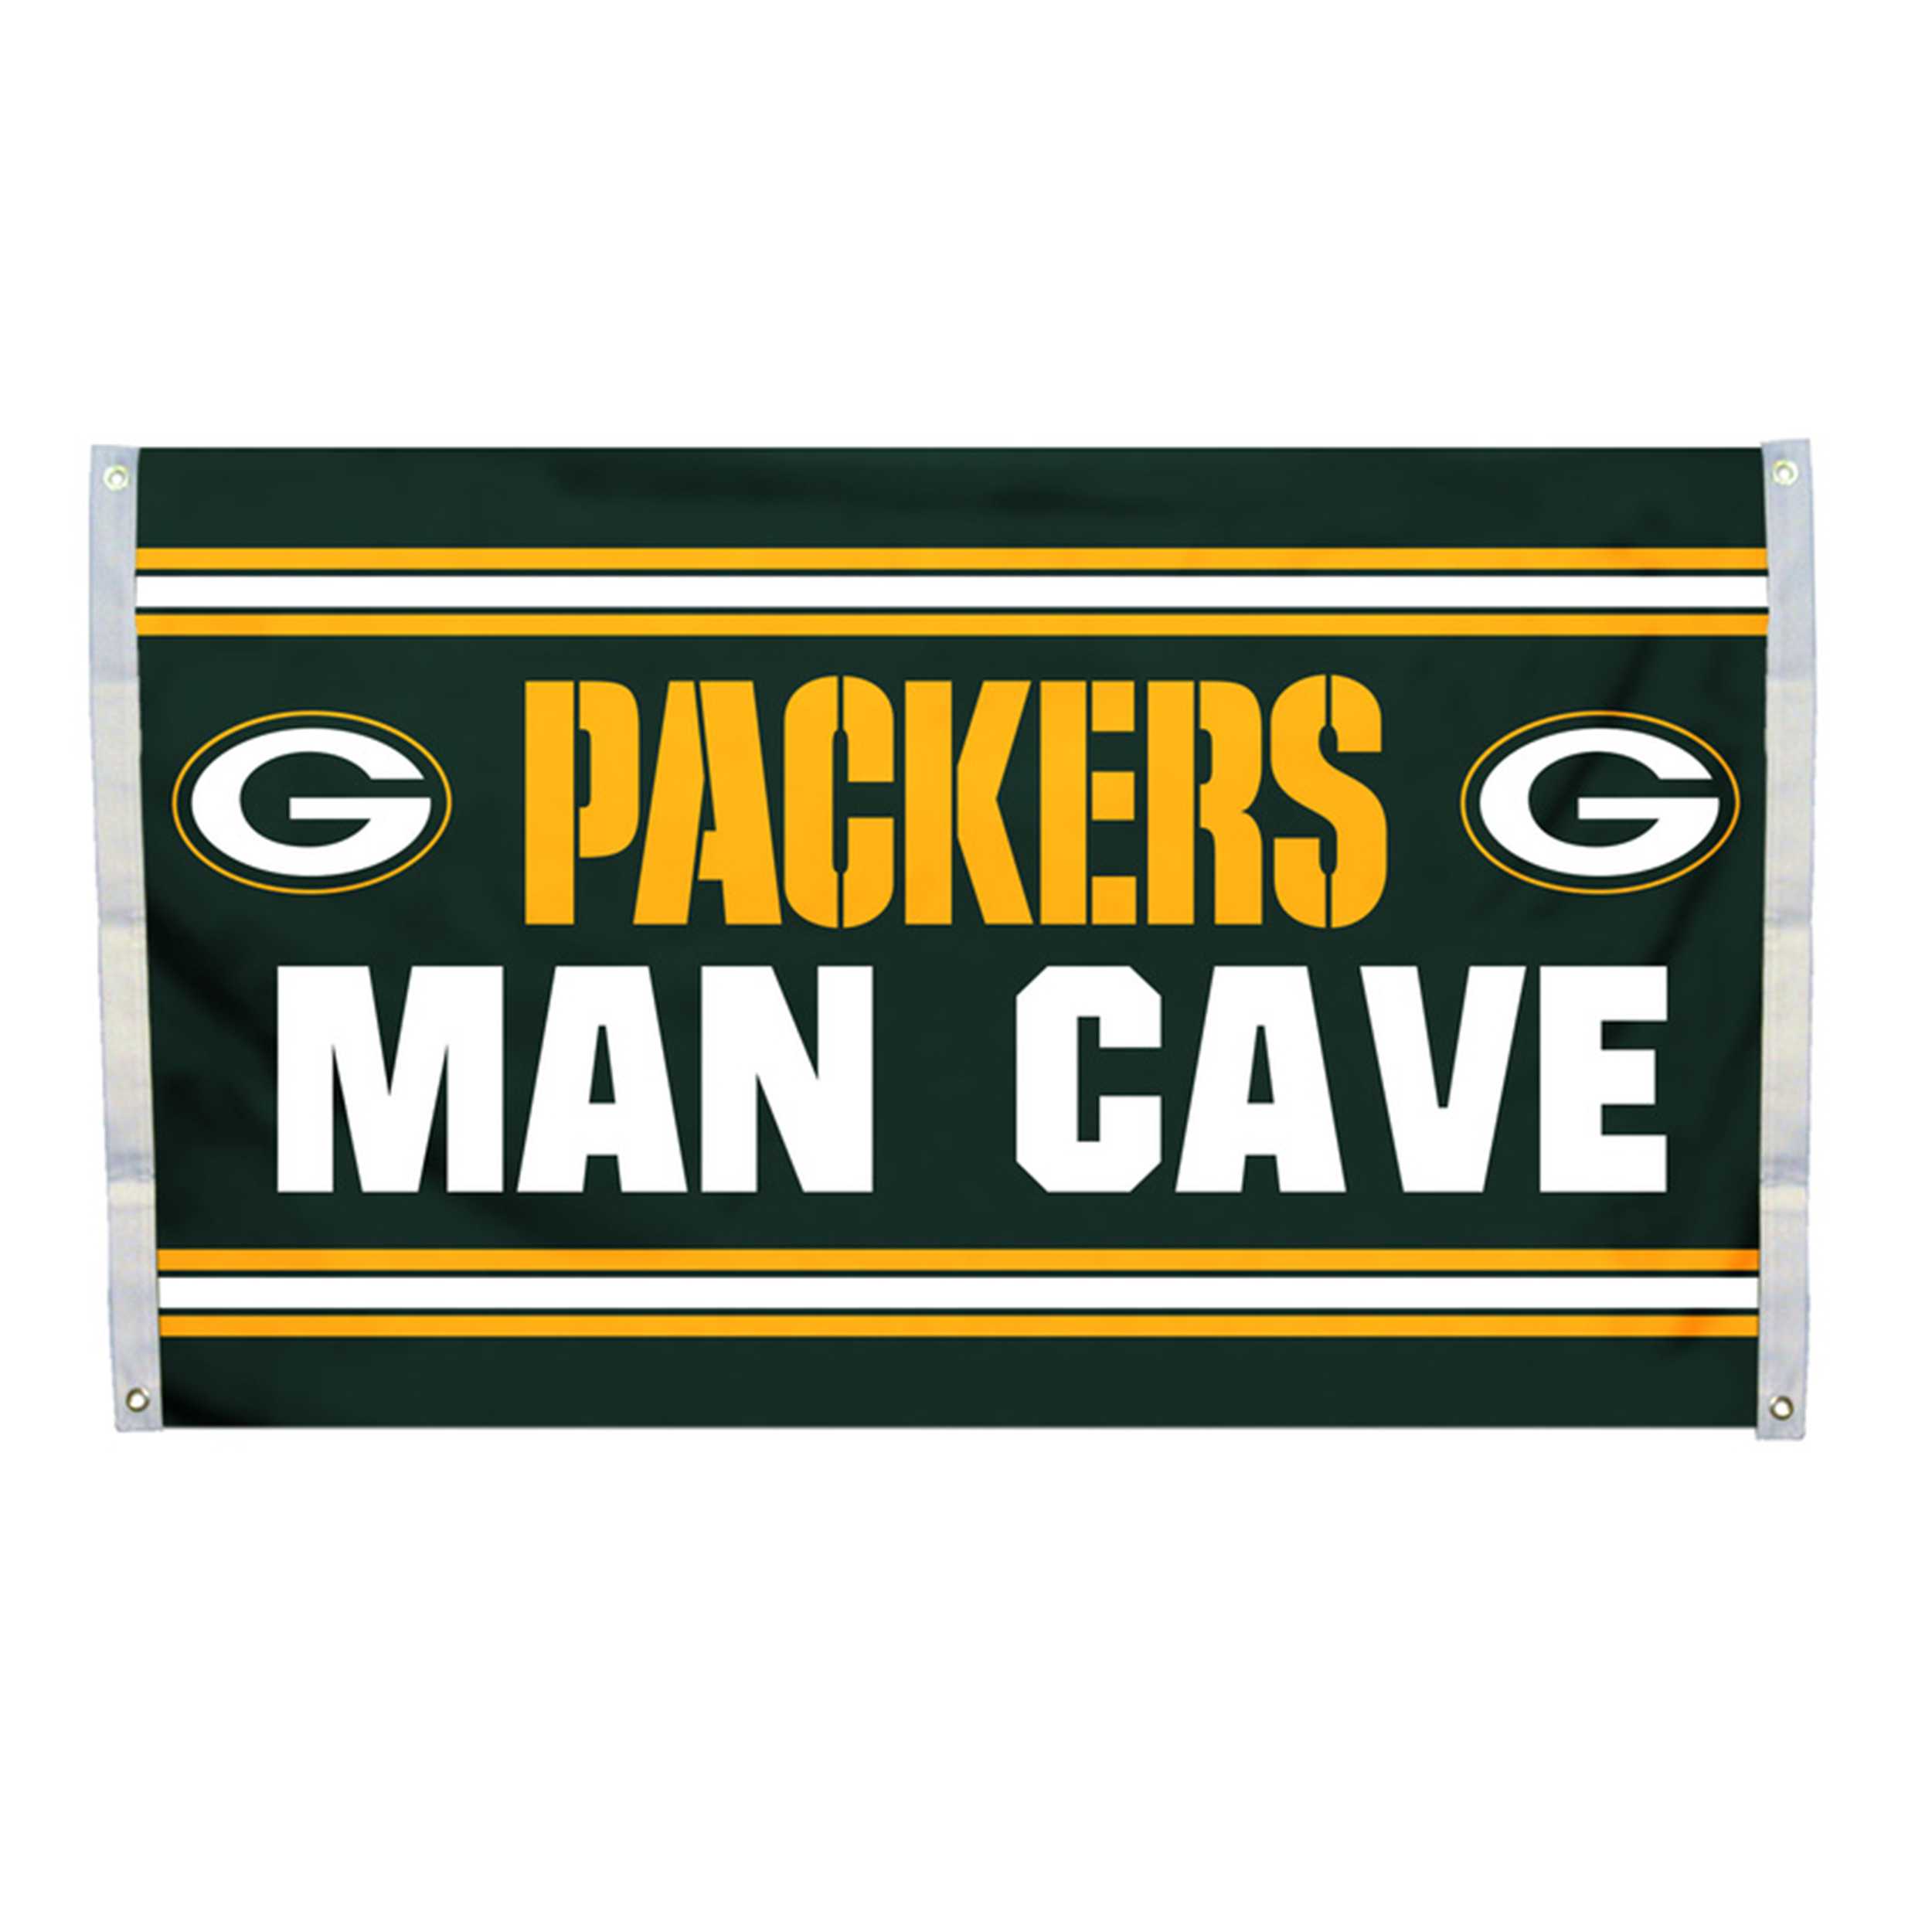 Mancave Flag-Green Bay Packers